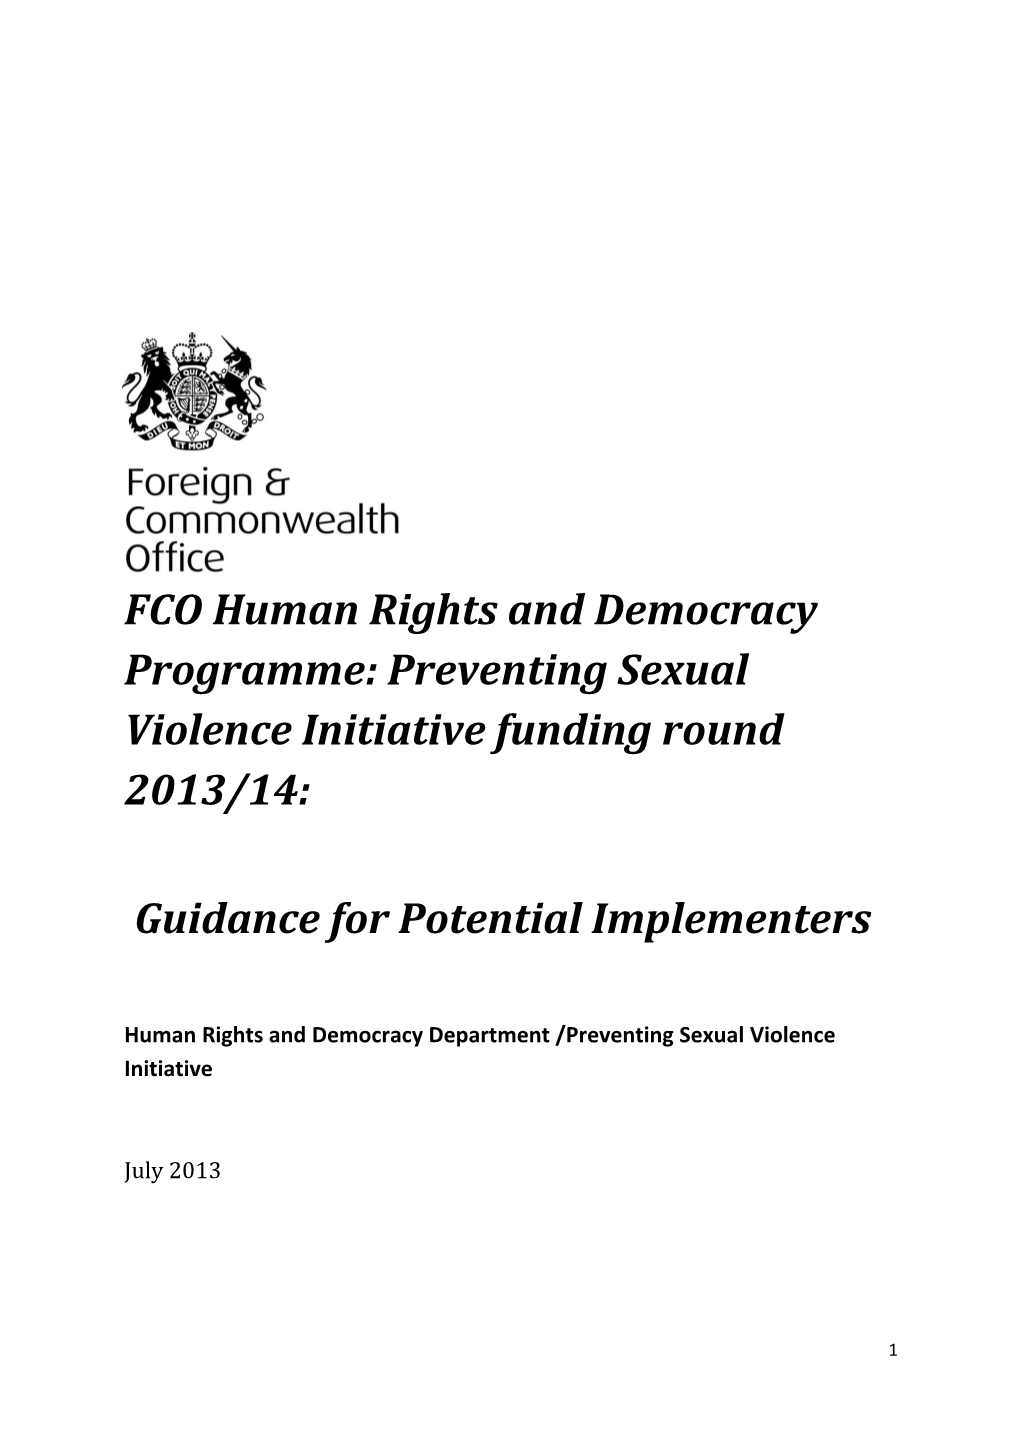 Guidance for Potential Implementers